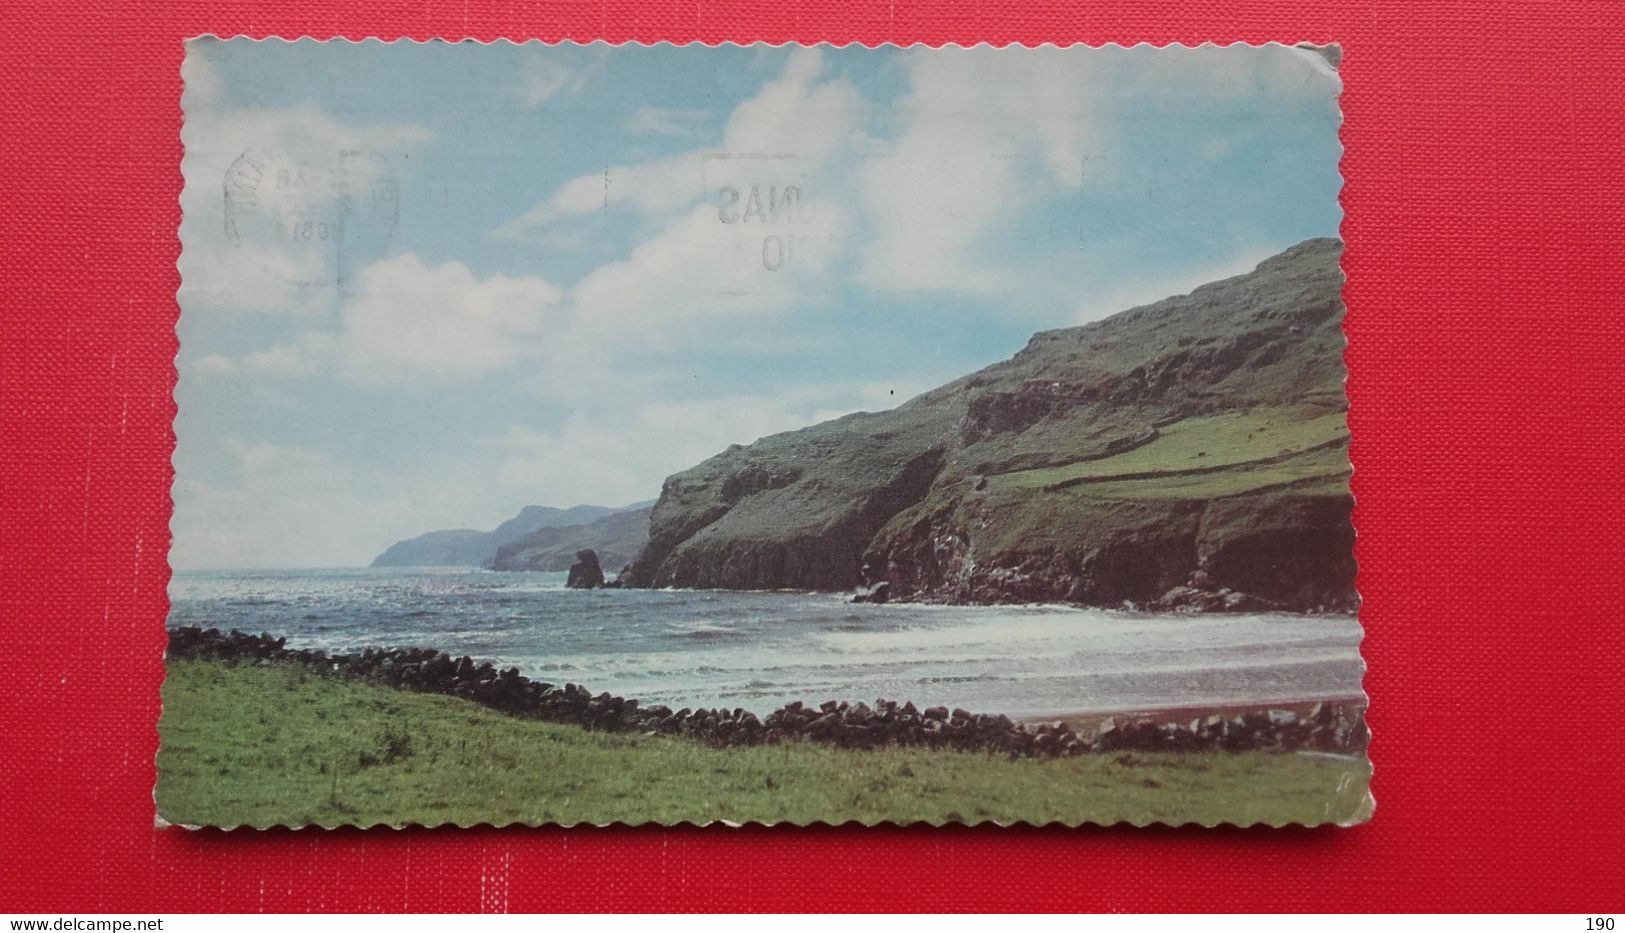 7 Postcards:PORT-NA-BLAGH,MUCKROSS HEADERRIGAL MOUNTAINDUNLEWY LOUGH,MARBLE HILL,LETTERKENNY,MULROY BAY - Donegal